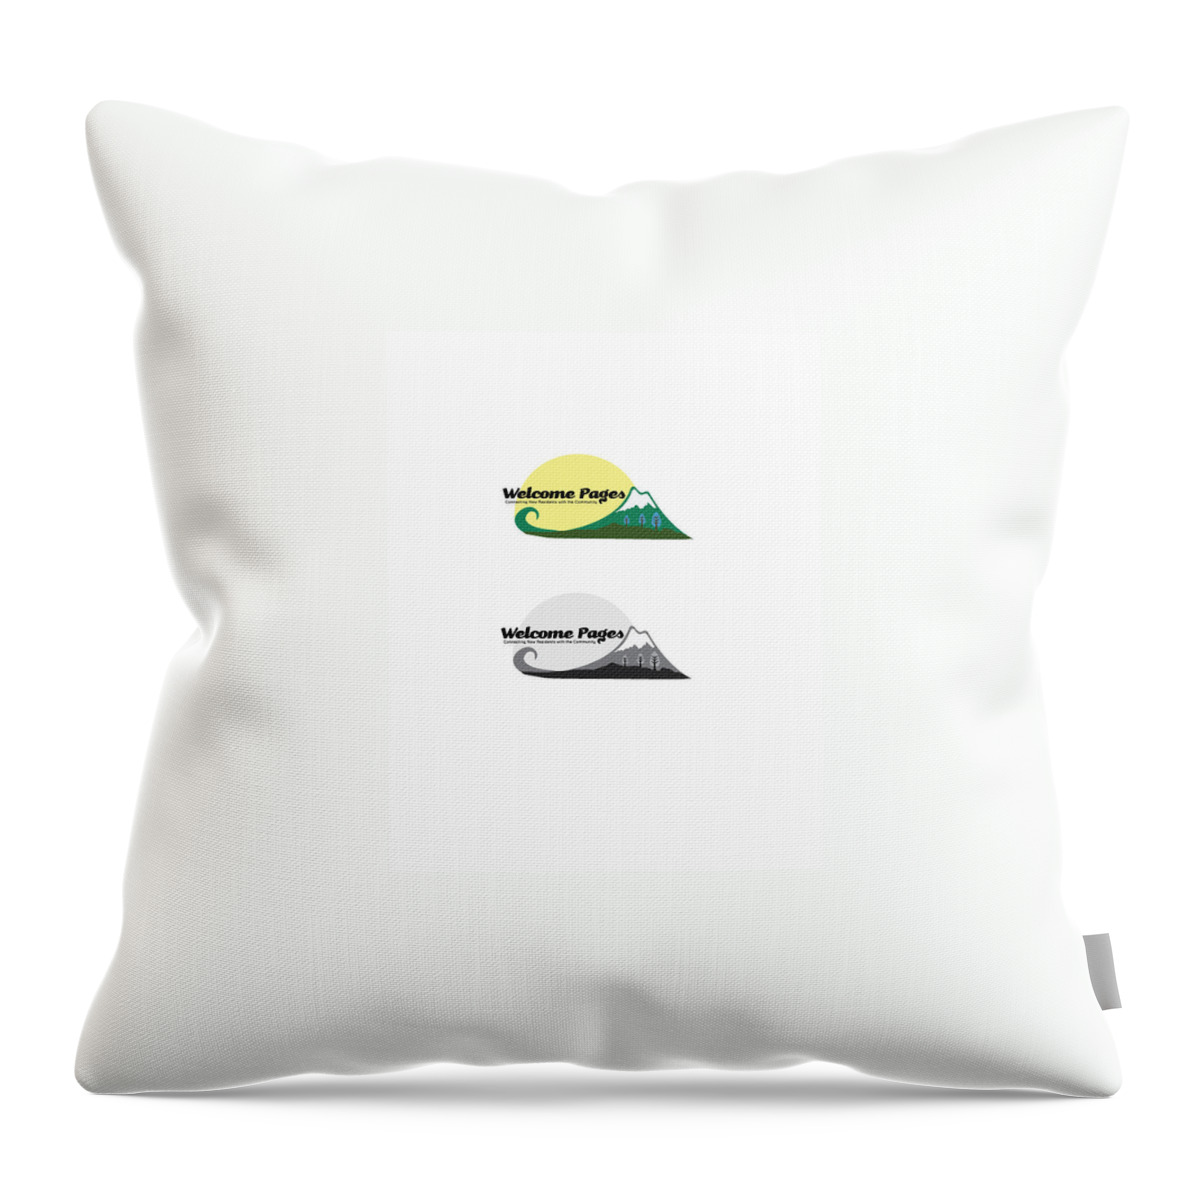 Welcome Pages Throw Pillow featuring the digital art Welcome Pages logo #1 by Teri Schuster